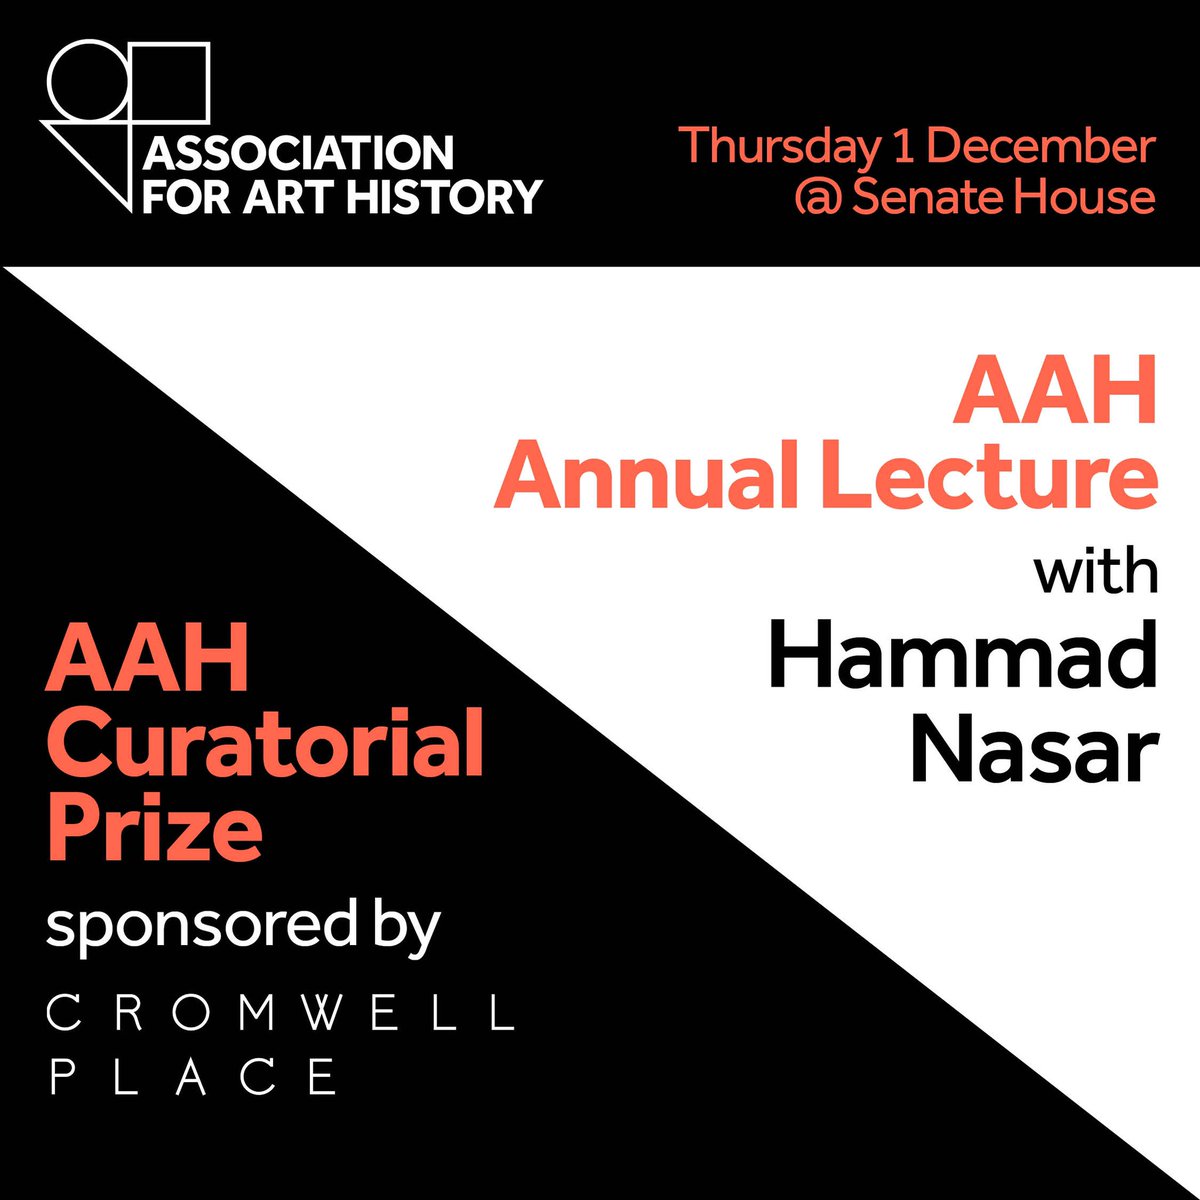 #AAHAnnualLecture #HammadNasar #AAHCuratorialPrize 

With respect for the industrial action in the Uni sector on 30 Nov, in which Senate House is taking part, we have moved this event to:

🗓 Thu 1 Dec
⏰ 6.30pm GMT
📍Senate House

Booking essential 👉forarthistory.org.uk/events/aah-ann…